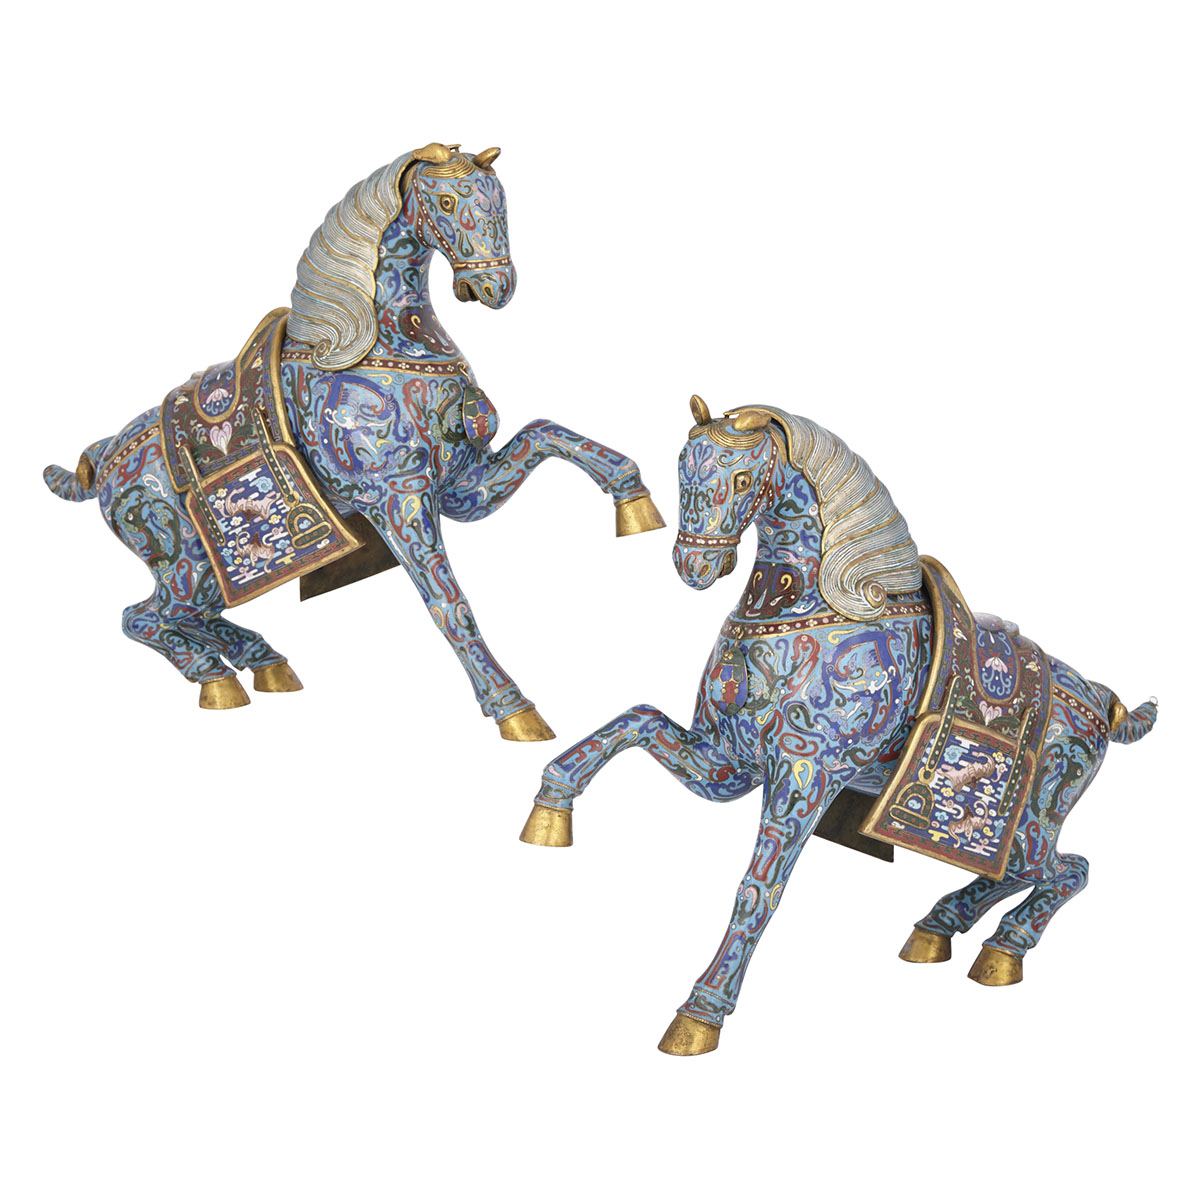 A Pair of Cloisonné Horses, First Half of 20th Century